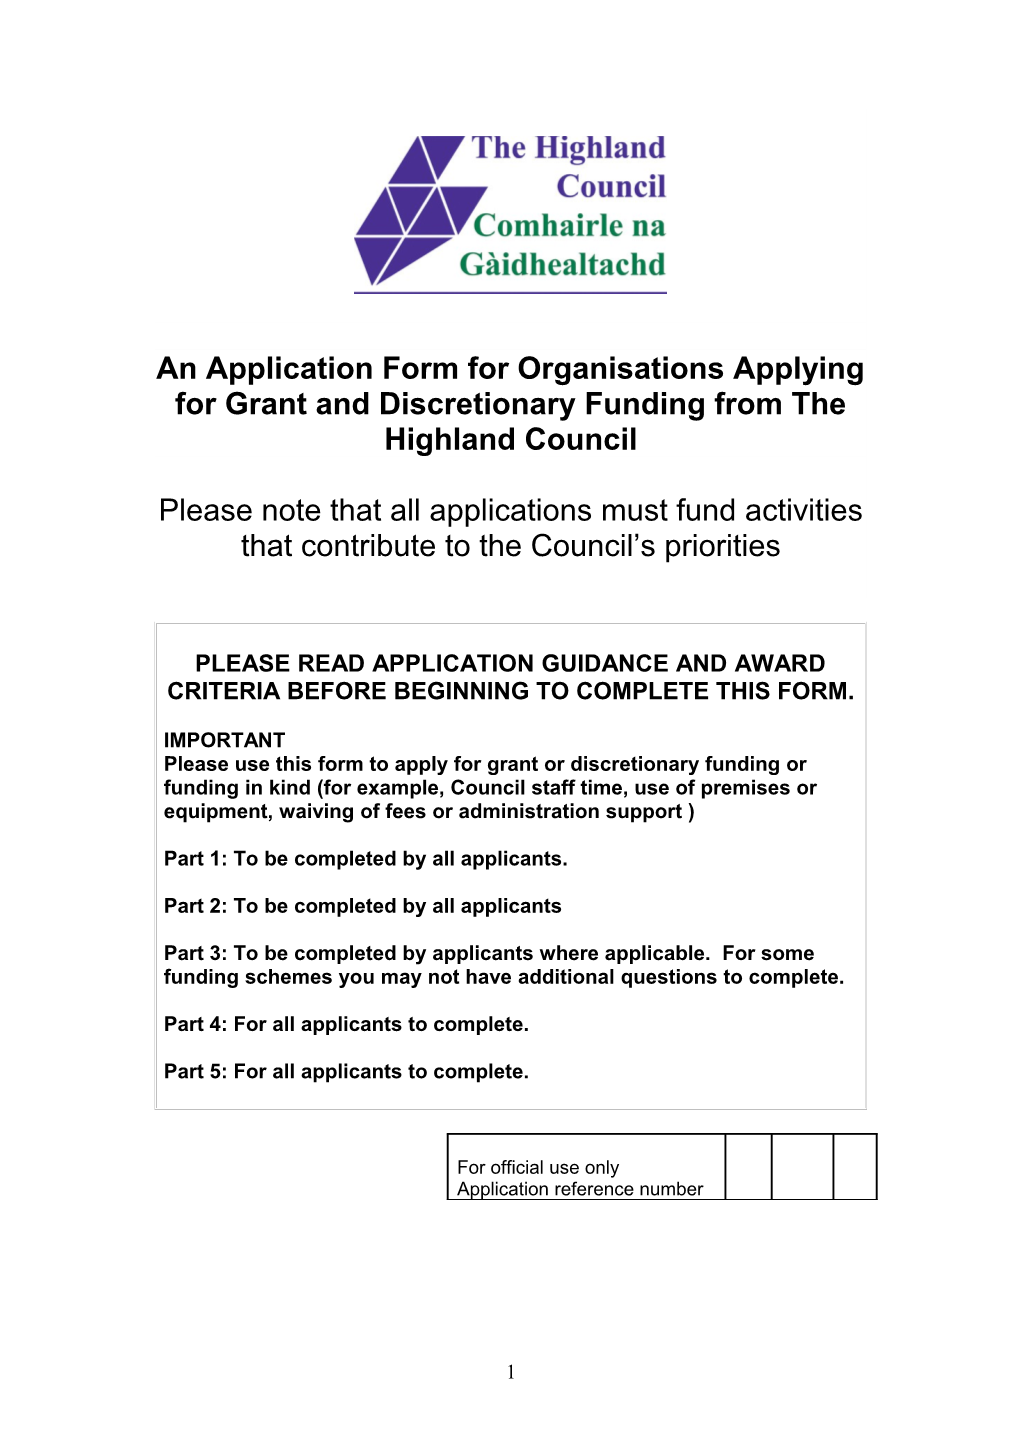 An Application Form for Organisations Applying for Grant and Discretionary Funding From